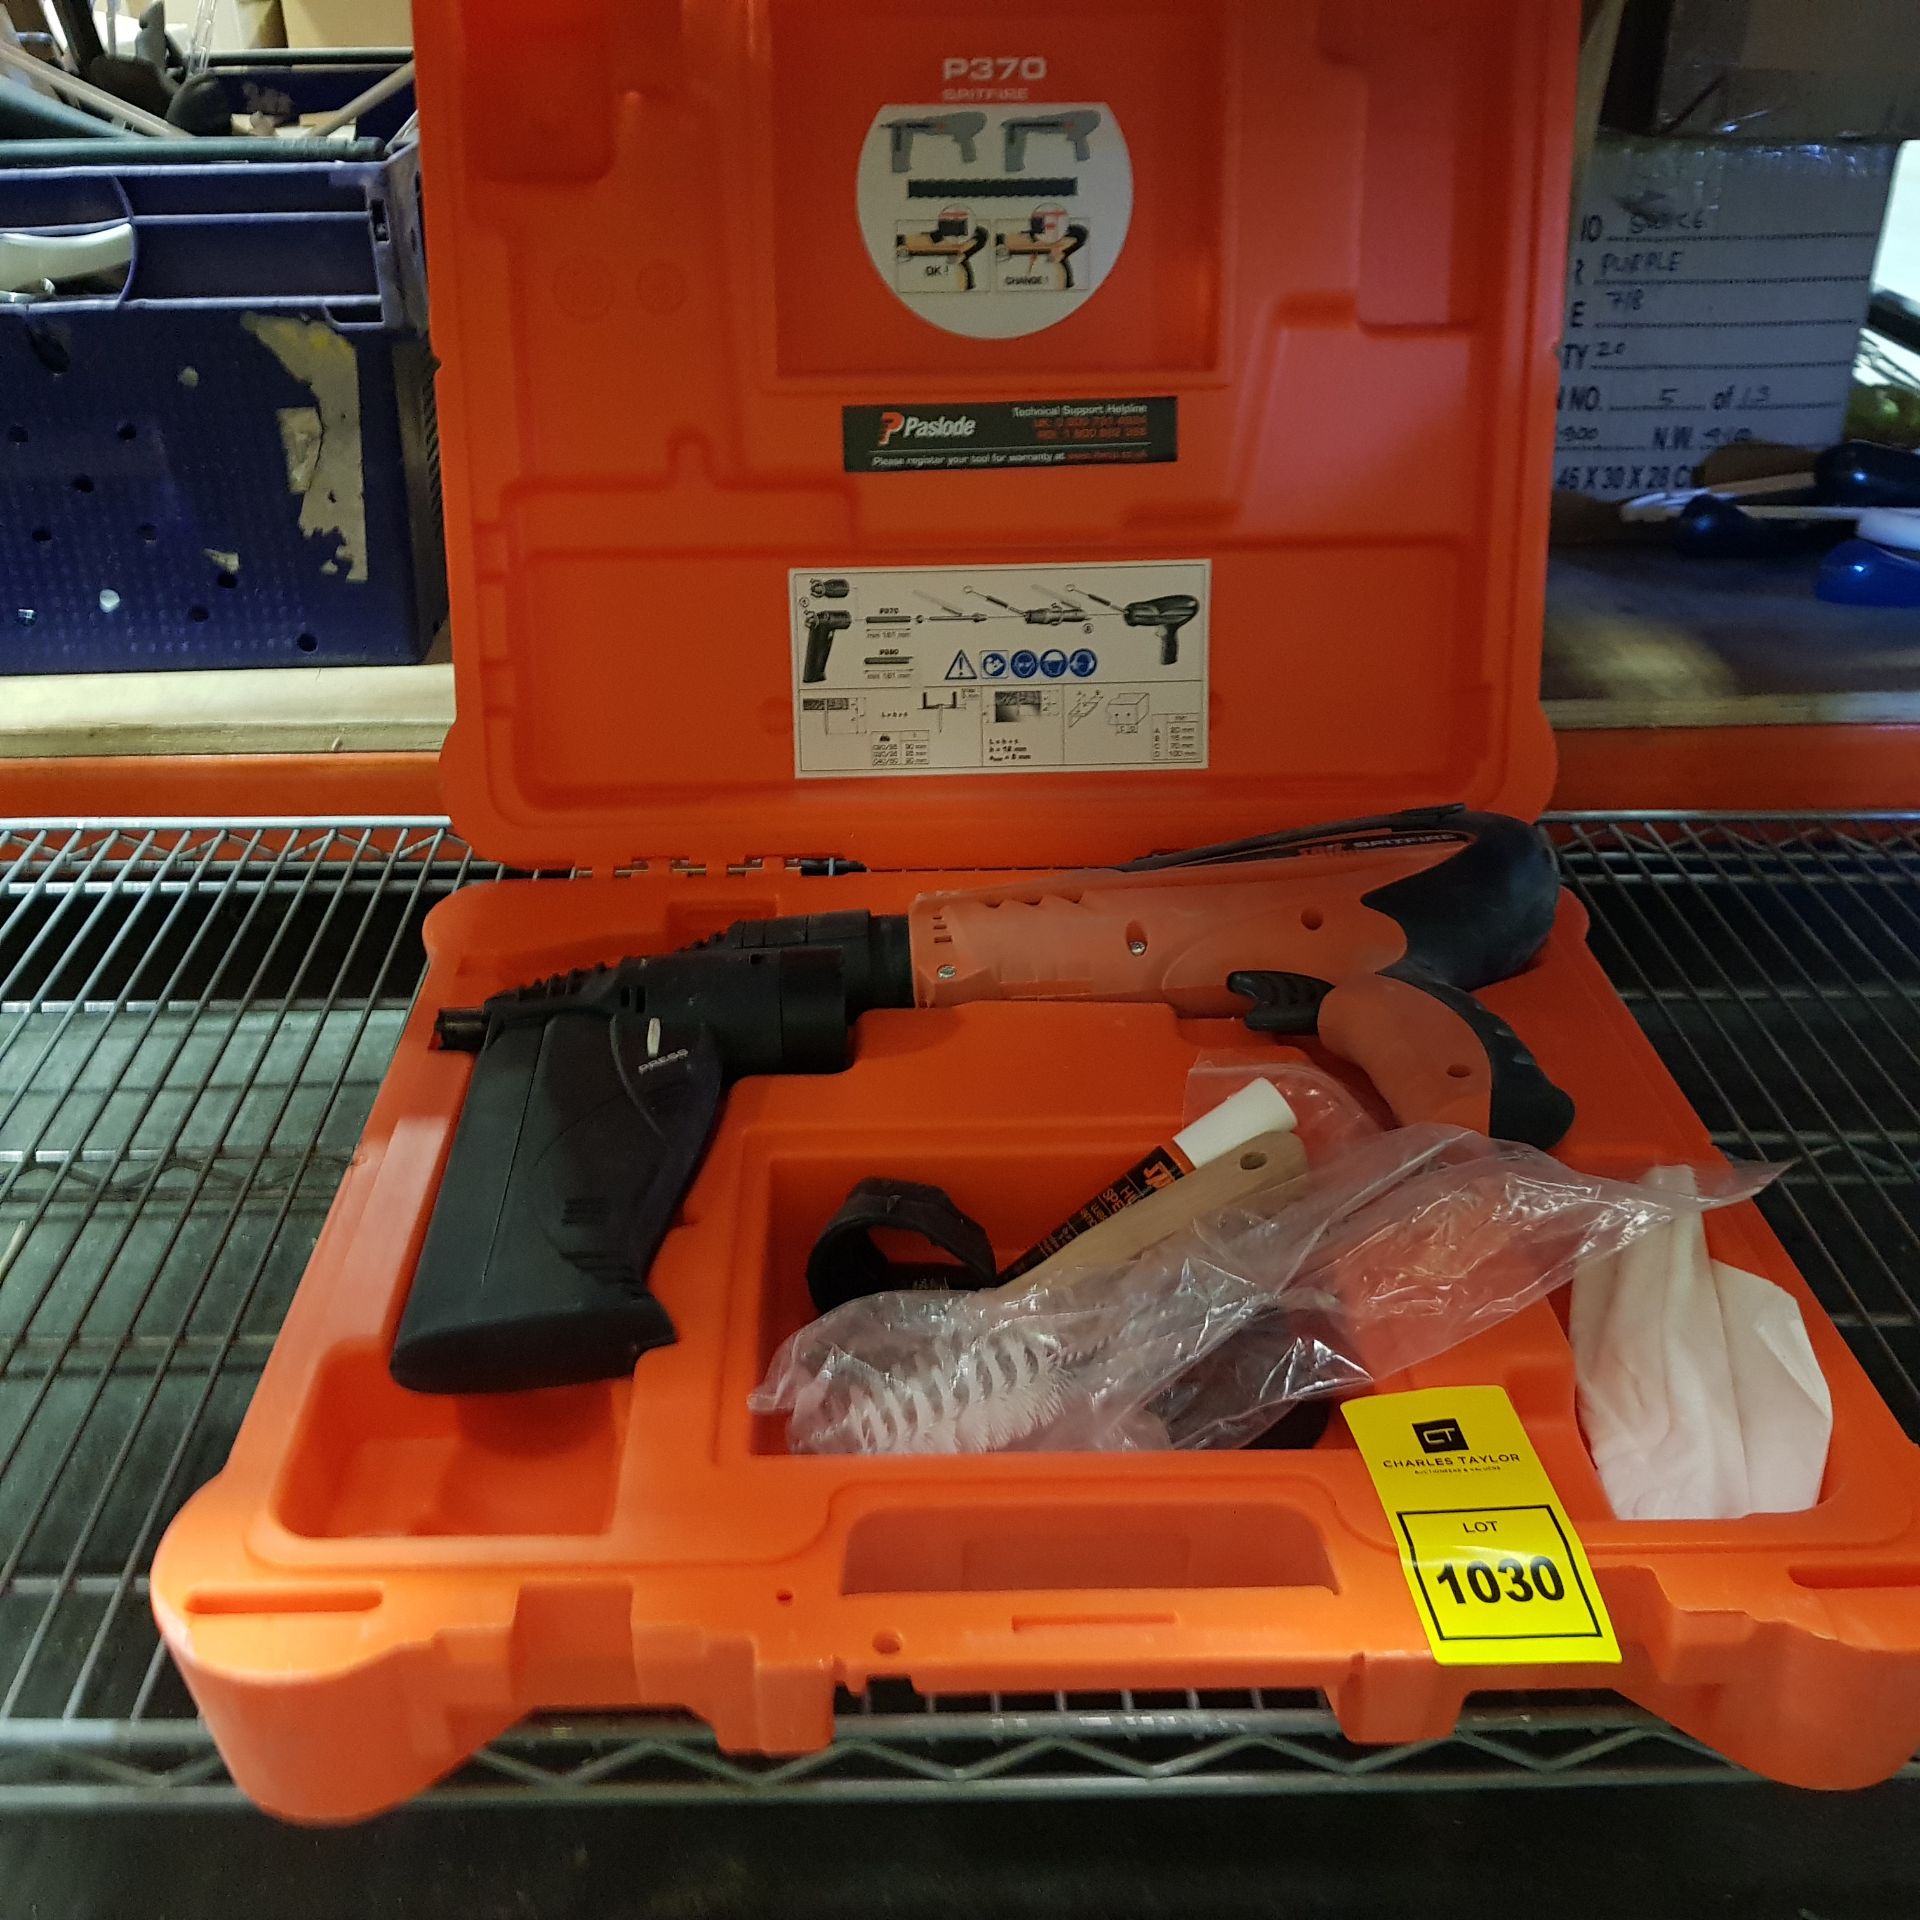 1 X PASLODE ( P370 ) SPITFIRE NAIL GUN - INCLUDES CARRY CASE / BRUSHES / LUBRICATOR ETC ) - ( PLEASE